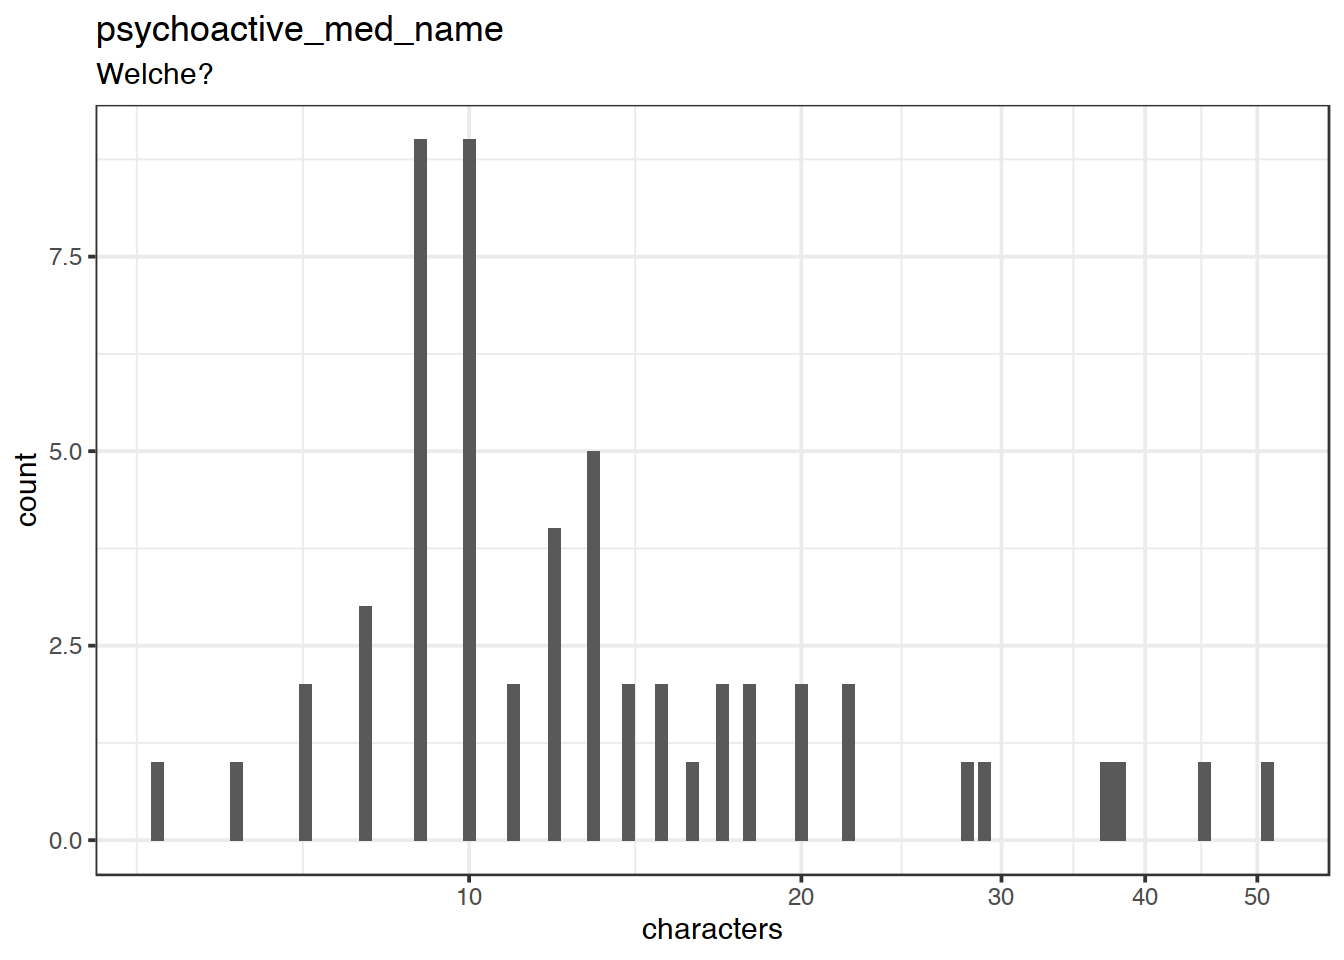 Distribution of values for psychoactive_med_name